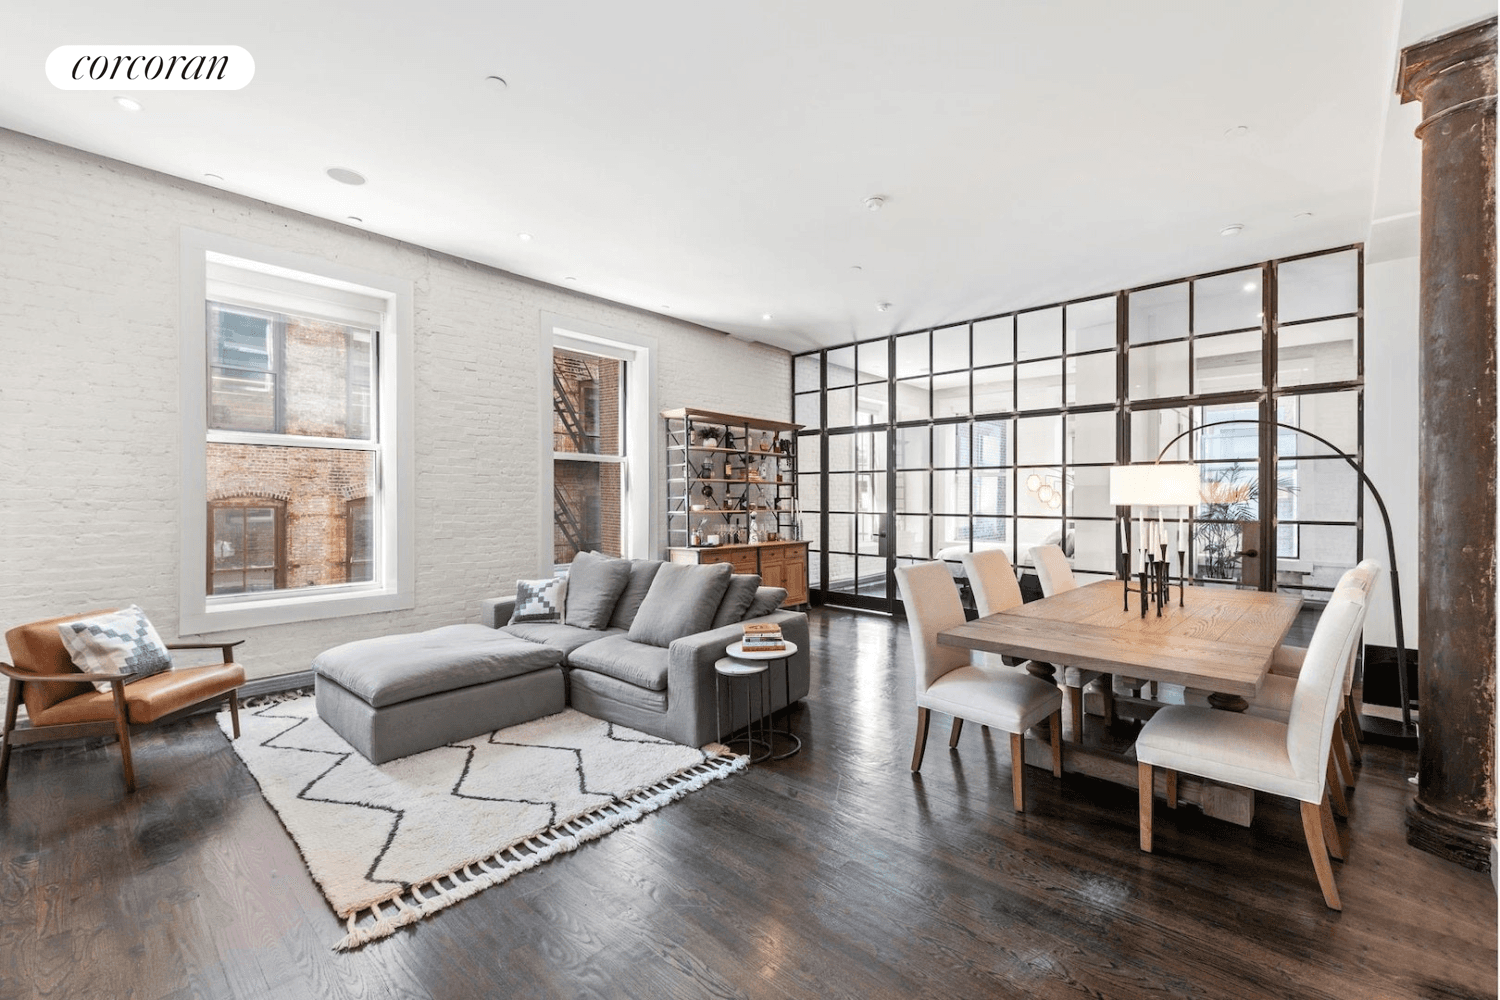 Located on a cobbled stoned street and surrounded by the best shops in the world, this corner Soho loft features seven oversized windows, 11 foot ceilings, four closets, three cast ...